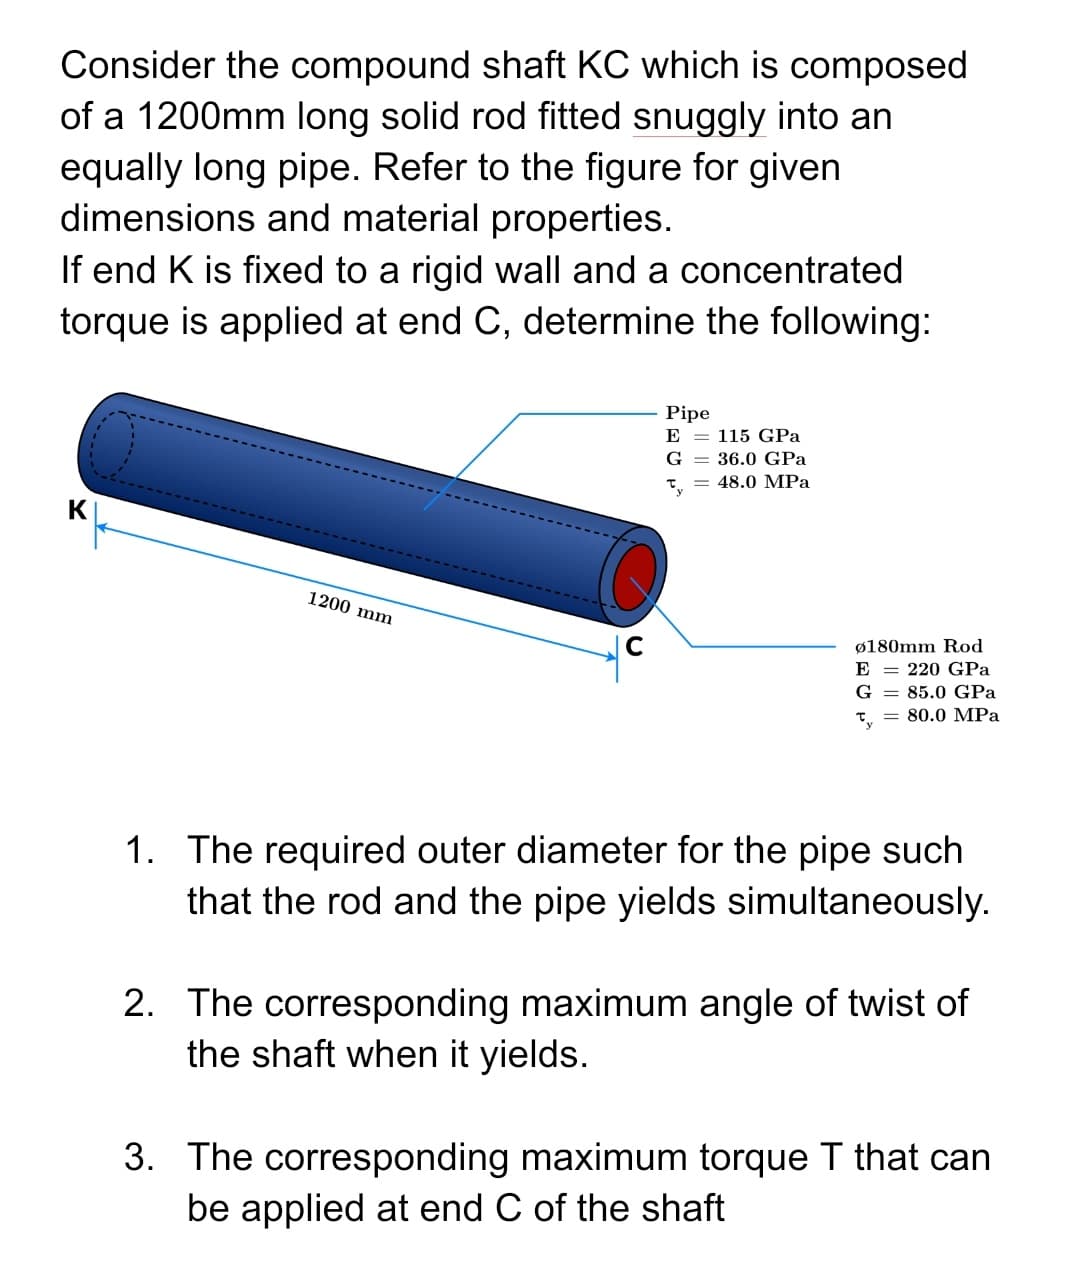 Consider the compound shaft KC which is composed
of a 1200mm long solid rod fitted snuggly into an
equally long pipe. Refer to the figure for given
dimensions and material properties.
If end K is fixed to a rigid wall and a concentrated
torque is applied at end C, determine the following:
Pipe
E
115 GPa
G = 36.0 GPa
48.0 MPa
Ty
1200 mm
ø180mm Rod
E = 220 GPa
G
85.0 GPa
80.0 MPa
1. The required outer diameter for the pipe such
that the rod and the pipe yields simultaneously.
2. The corresponding maximum angle of twist of
the shaft when it yields.
3. The corresponding maximum torque T that can
be applied at end C of the shaft
